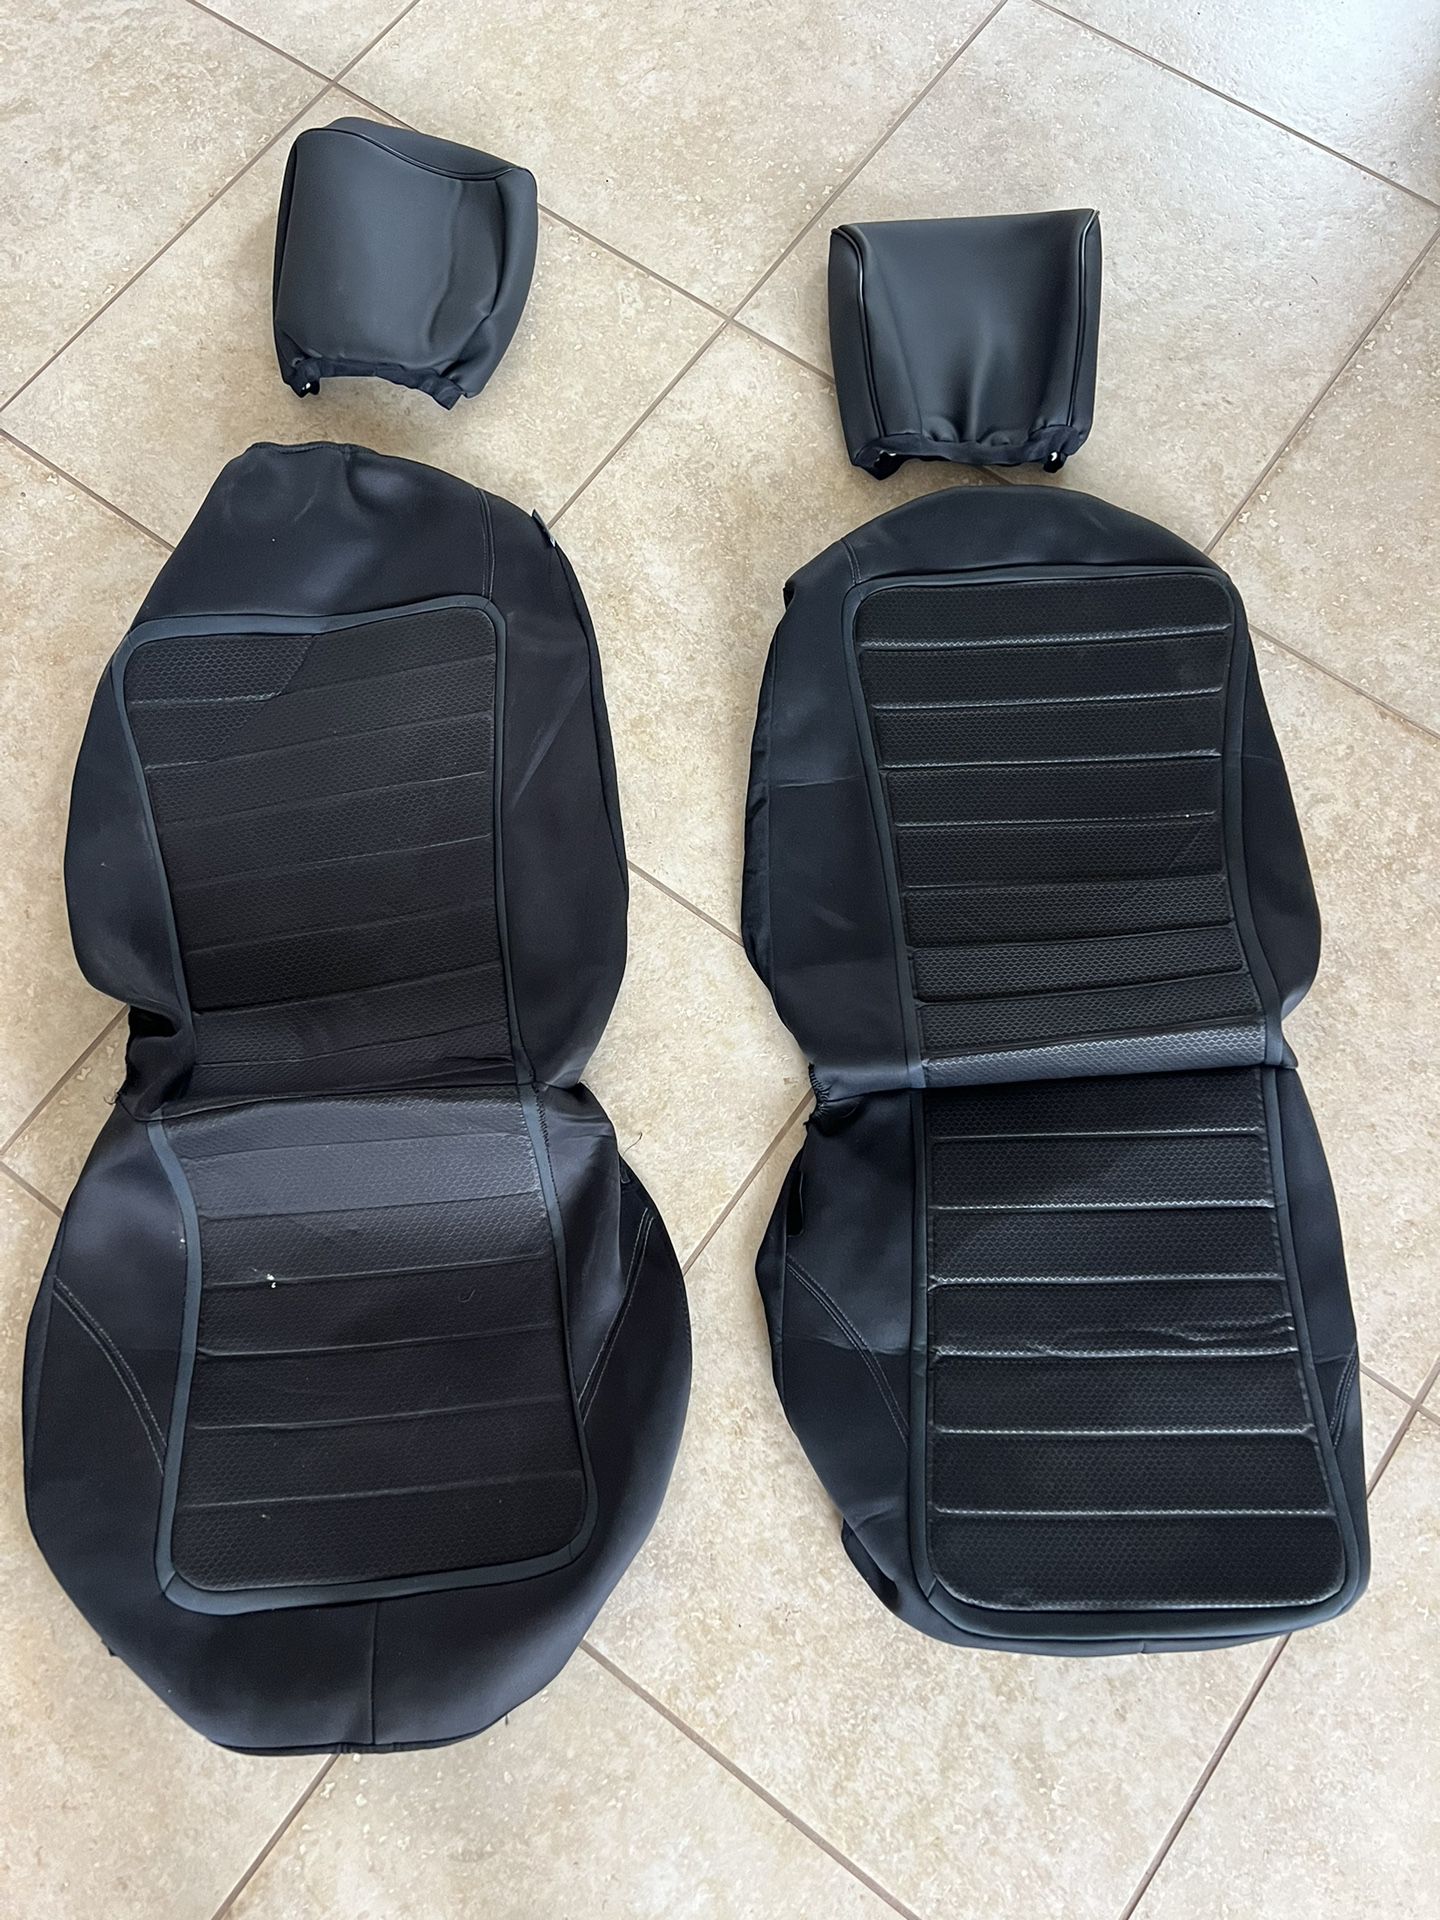 WinPlus TypeS Wetsuit Seat Covers with headrests - sc56510-84